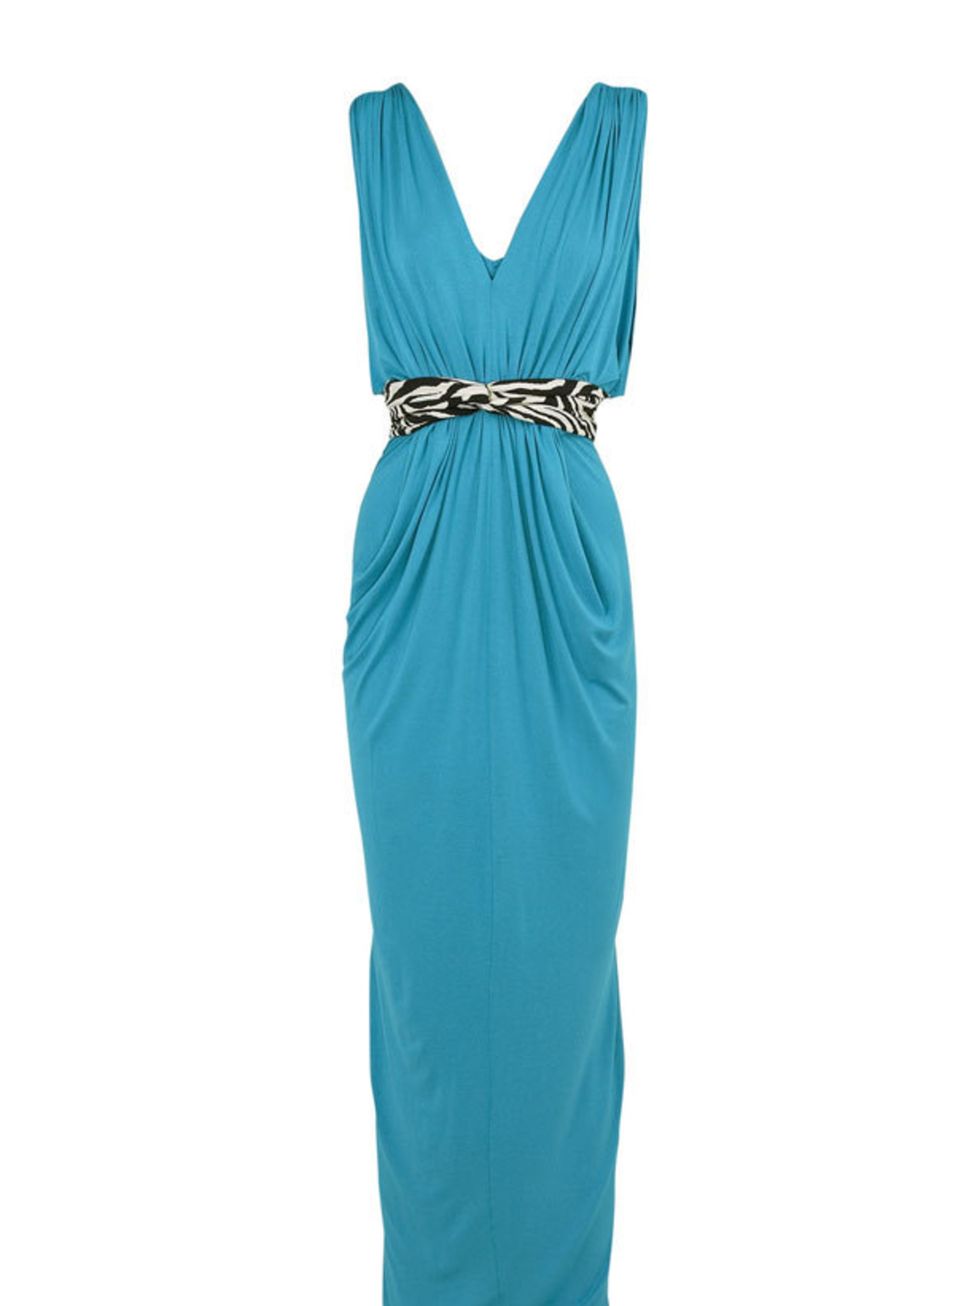 <p>Turquoise and zebra print dress, £190, by T-Bags at <a href="http://www.net-a-porter.com/Shop/Designers/T_Bags">Net-a-Porter</a> </p>